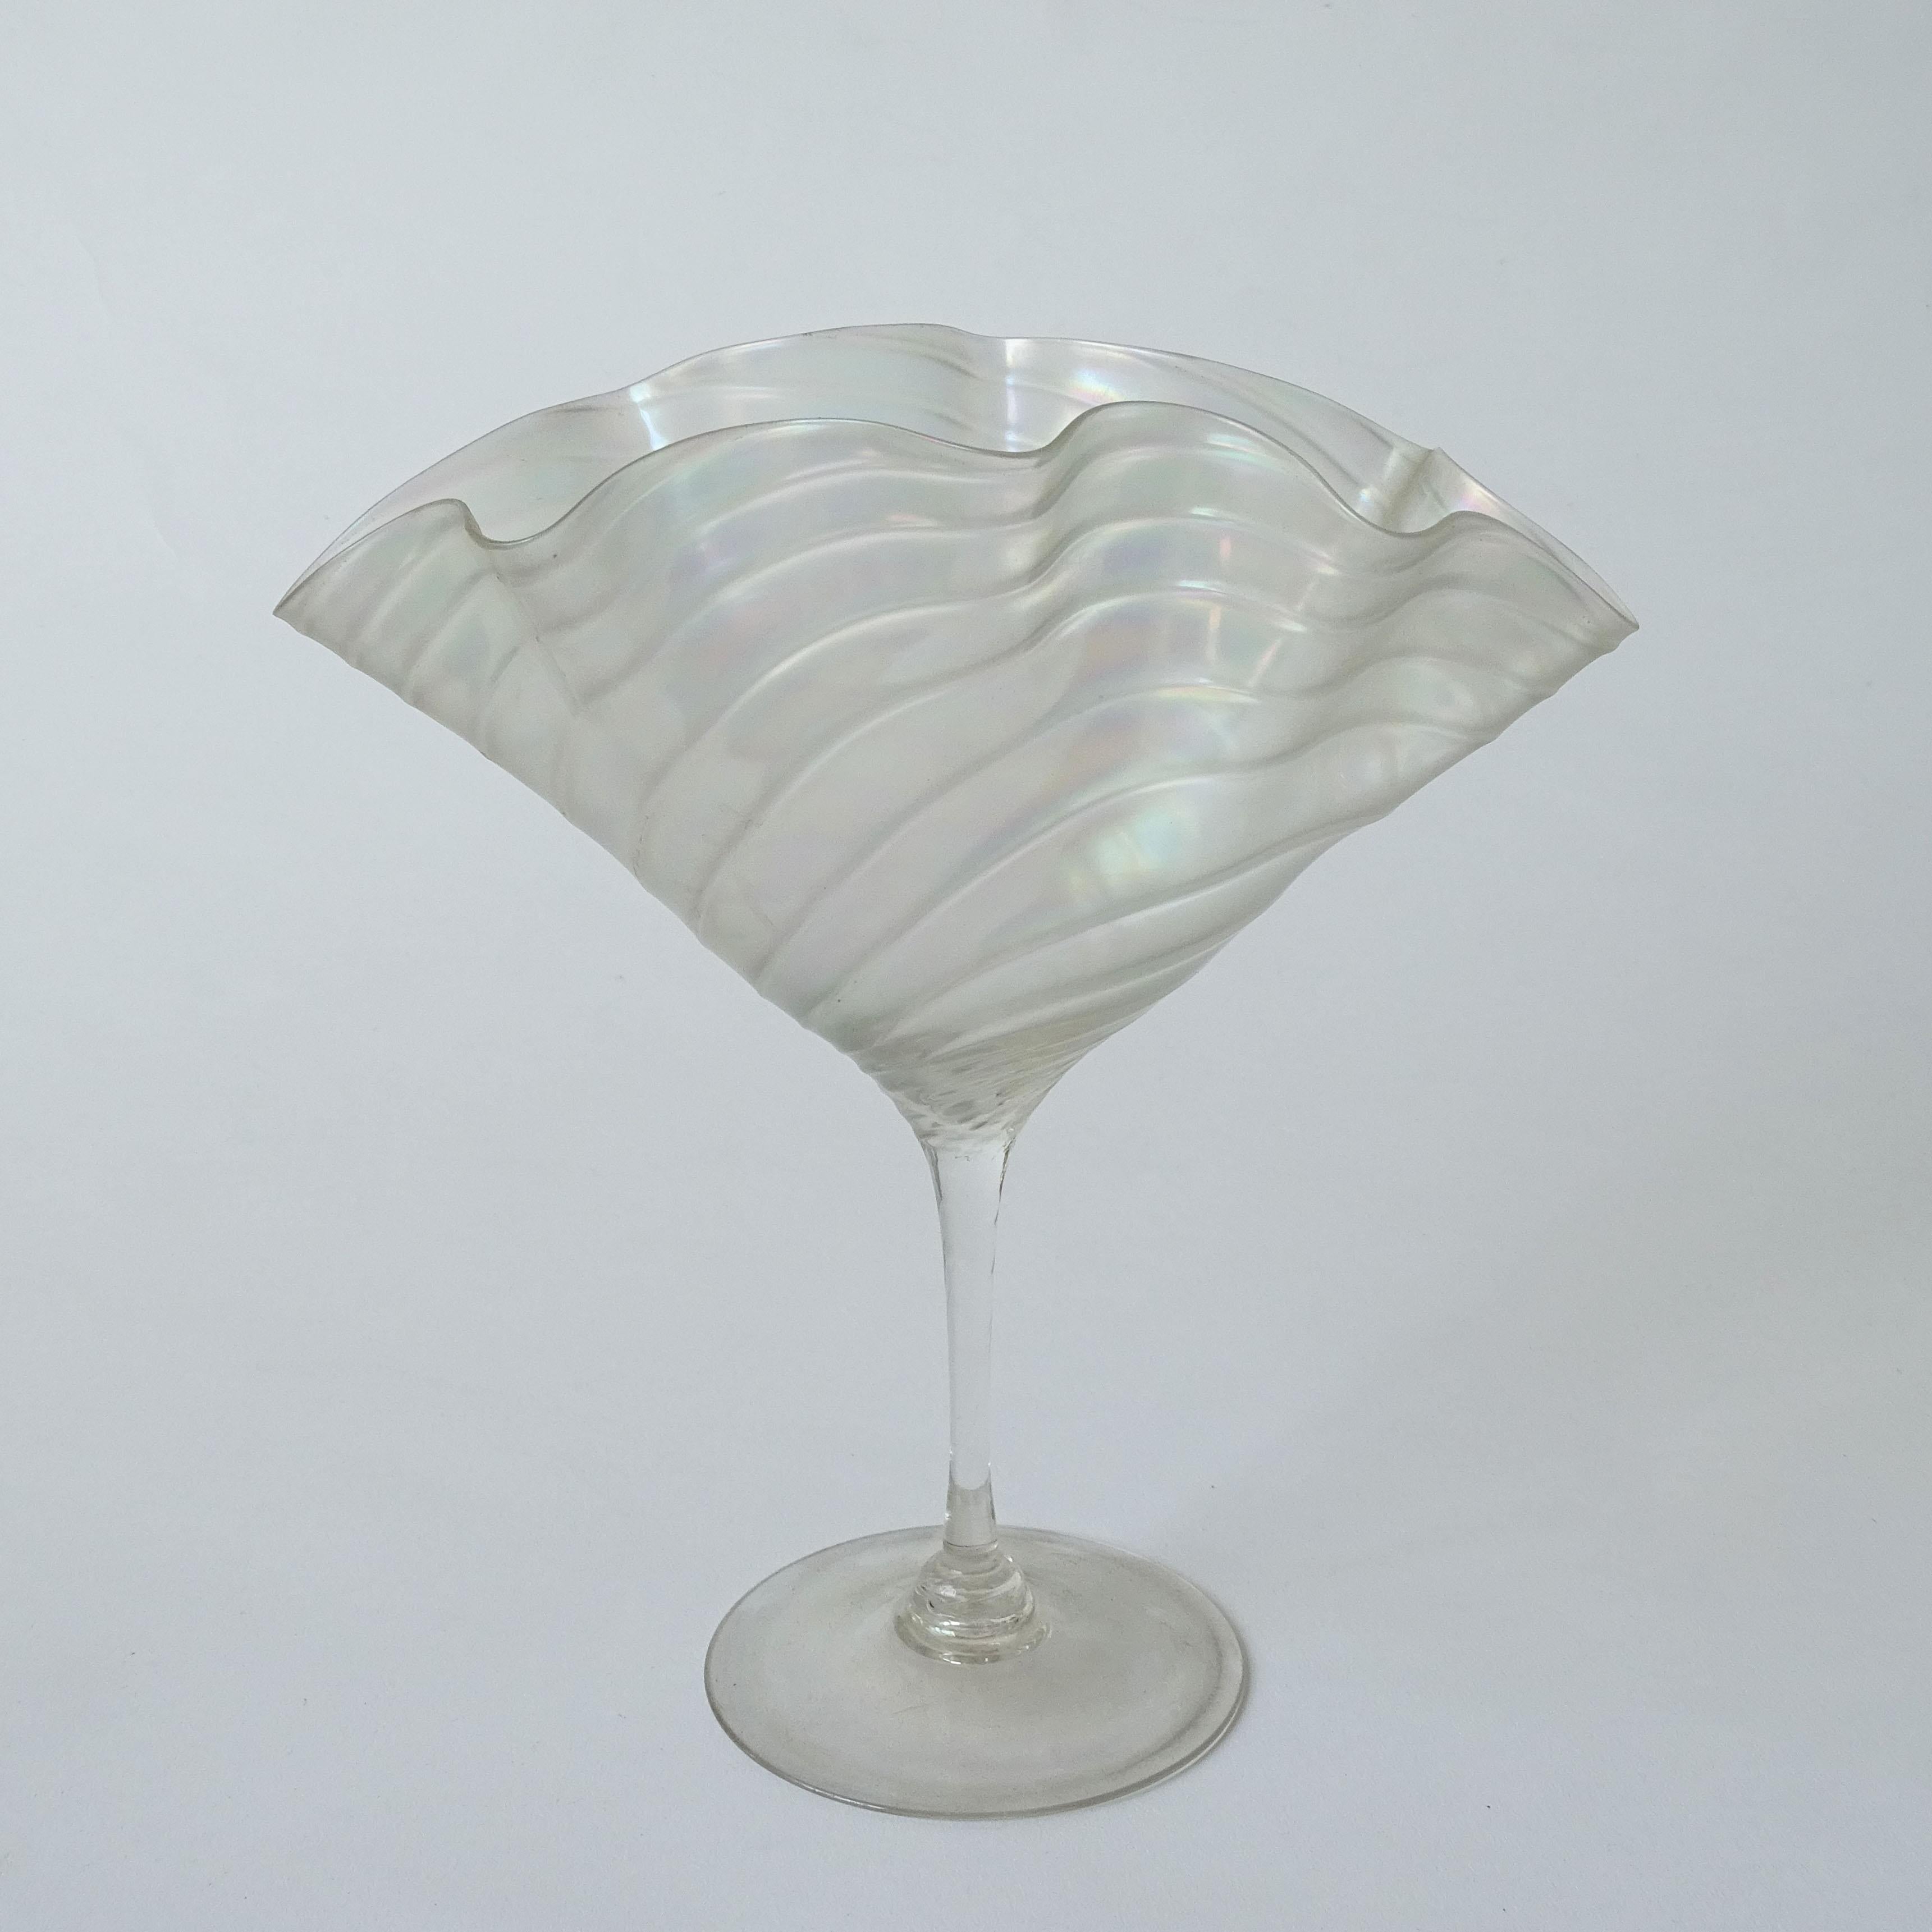 Steuben Verre de Soie Glass Fan Vase, Corning, New York, c. 1925, ruffle-edged bowl set on a clear stem and round base, unmarked